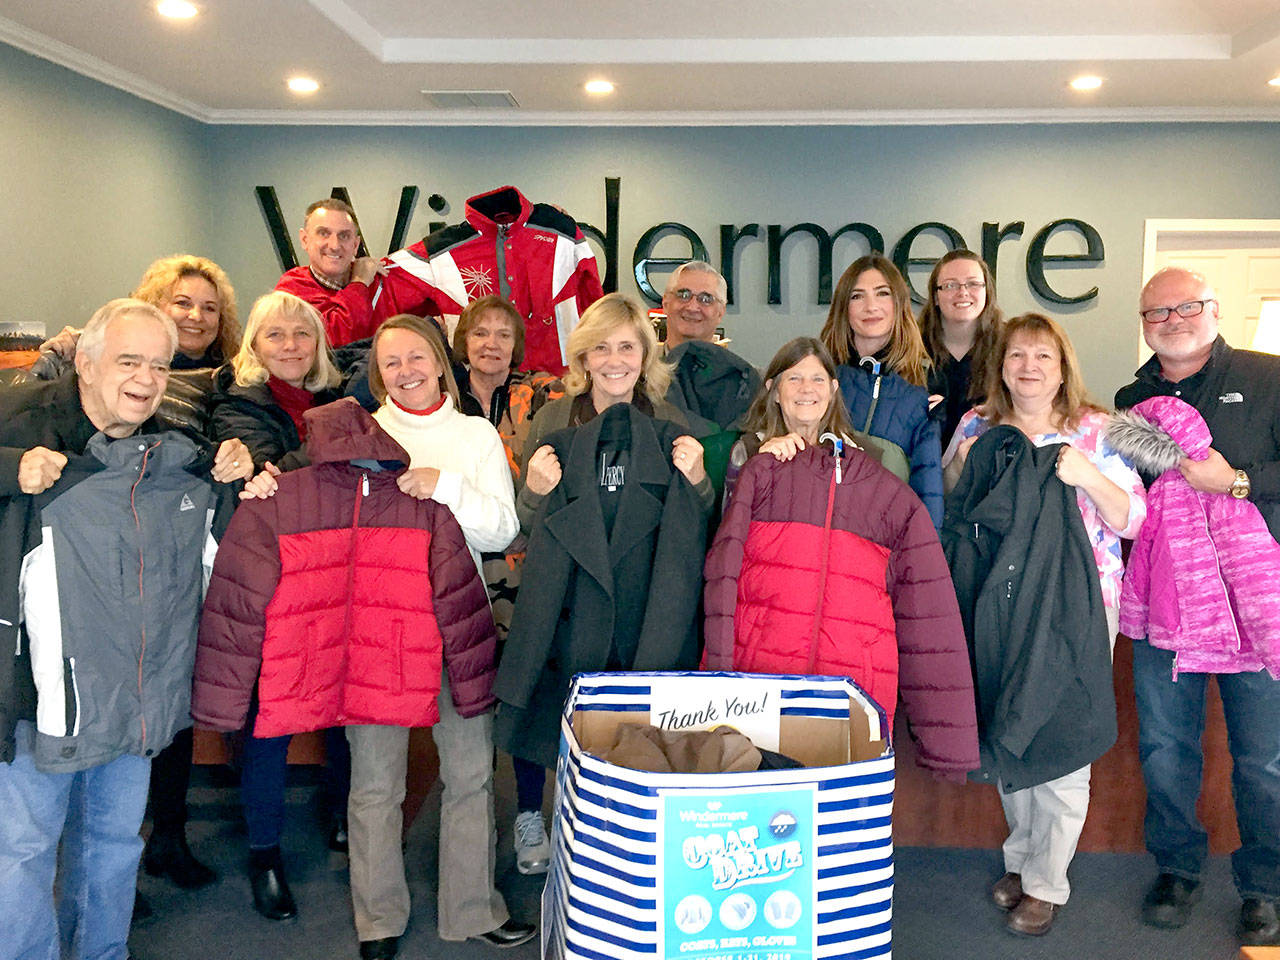 Windermere Real Estate offices collect 415 coats for people in need